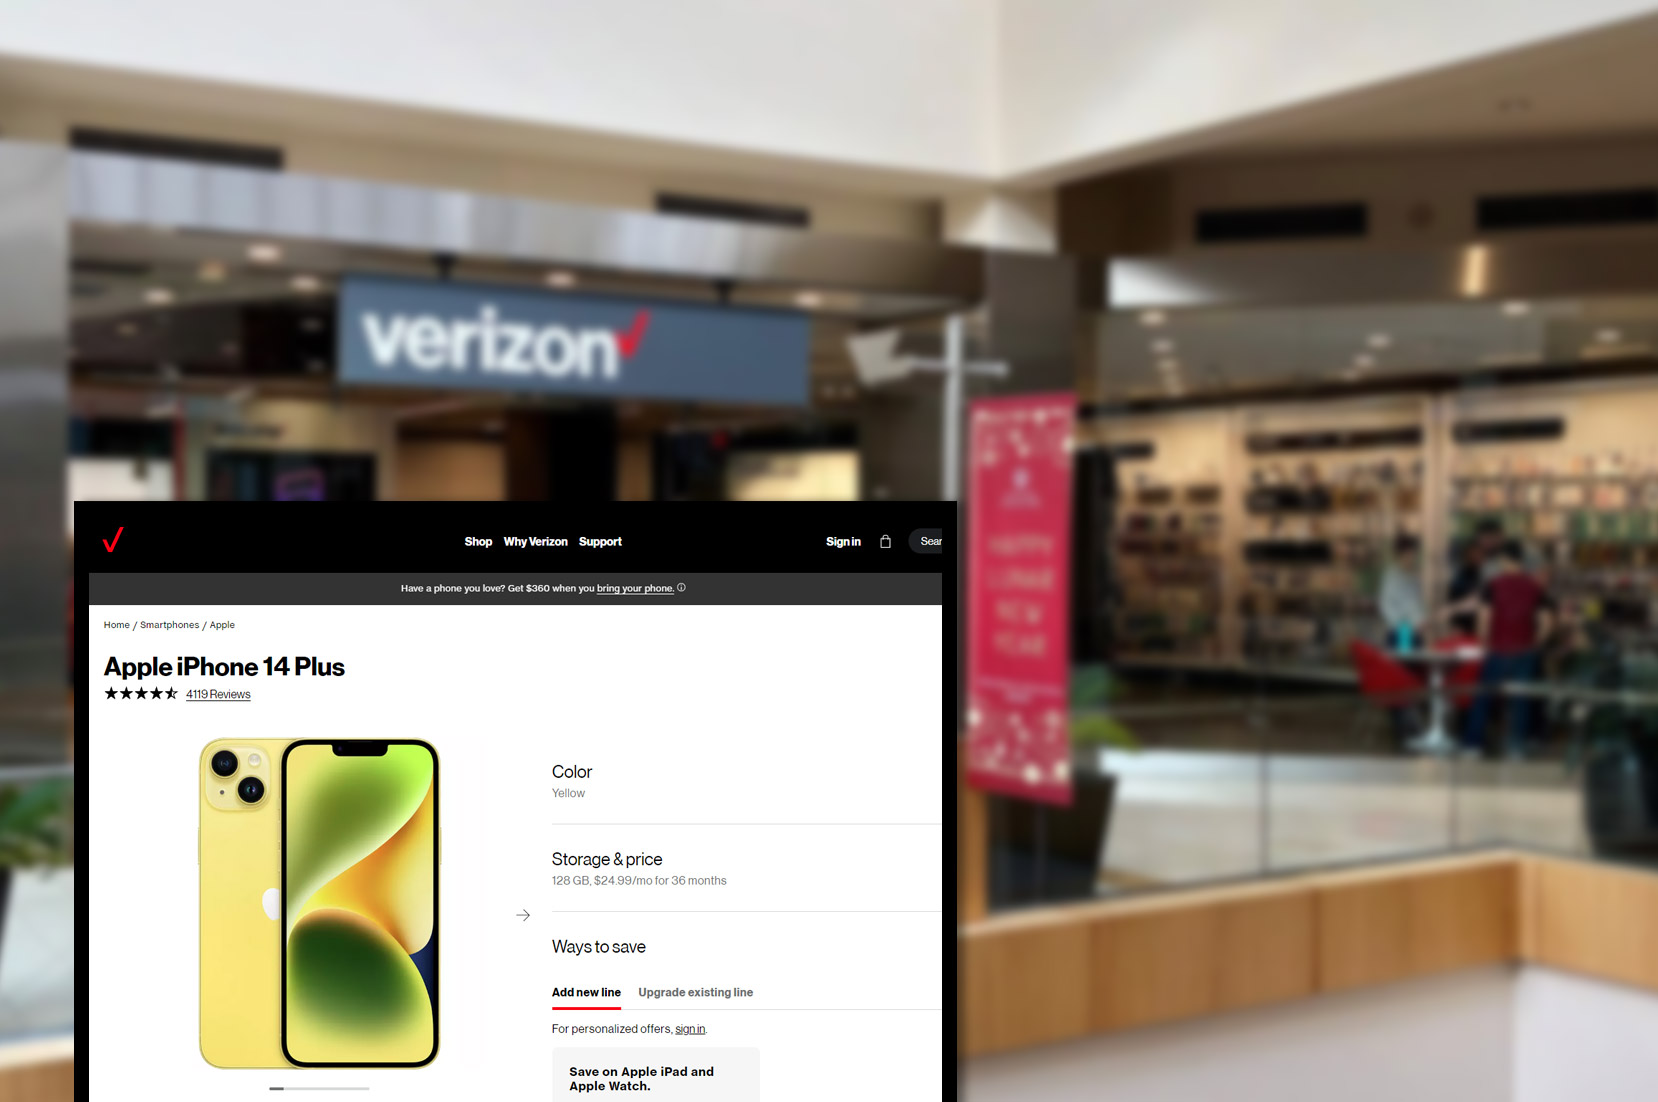 verizonwireless-comproduct-pricing-information-and-image-scraping-services